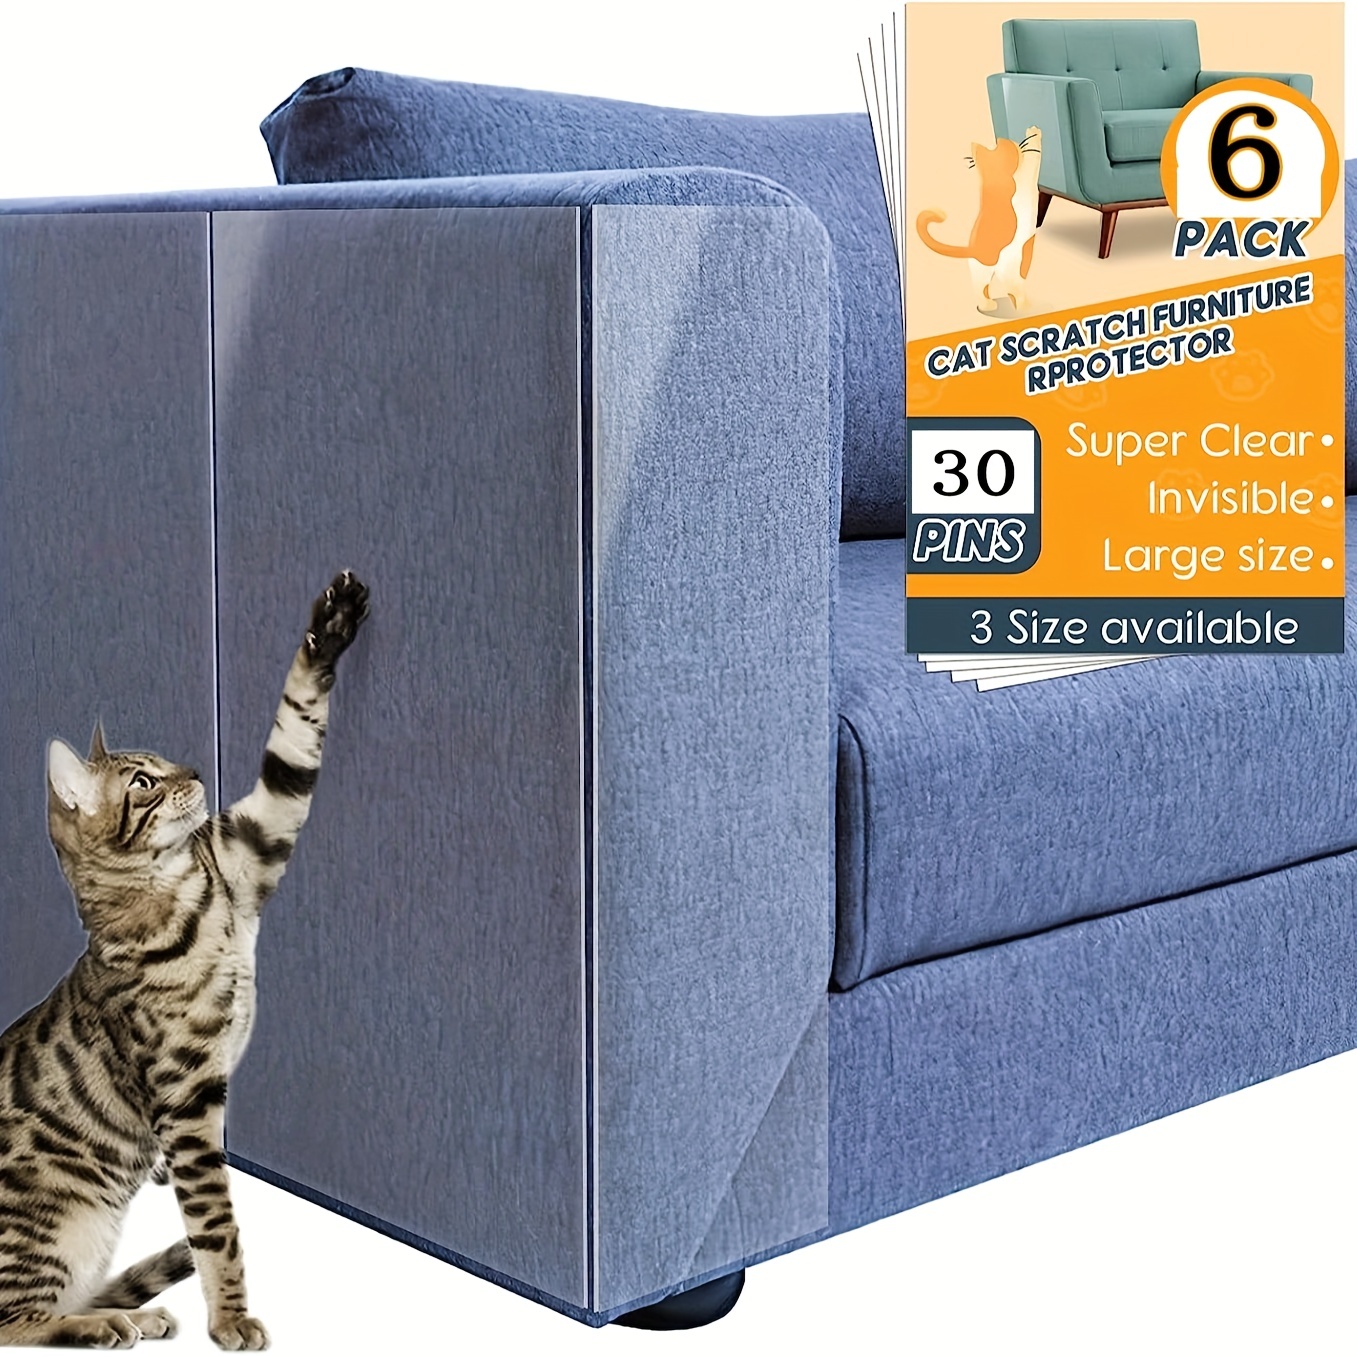 

6 Pack Cat Scratching Protection, Cat Scratch Furniture Protector Invisible, Waterproof Couch Protector From Cat Claws, Anti Cat Scratch Deterrent For Sofa, Doors, Chairs (17" X 12/8/6")